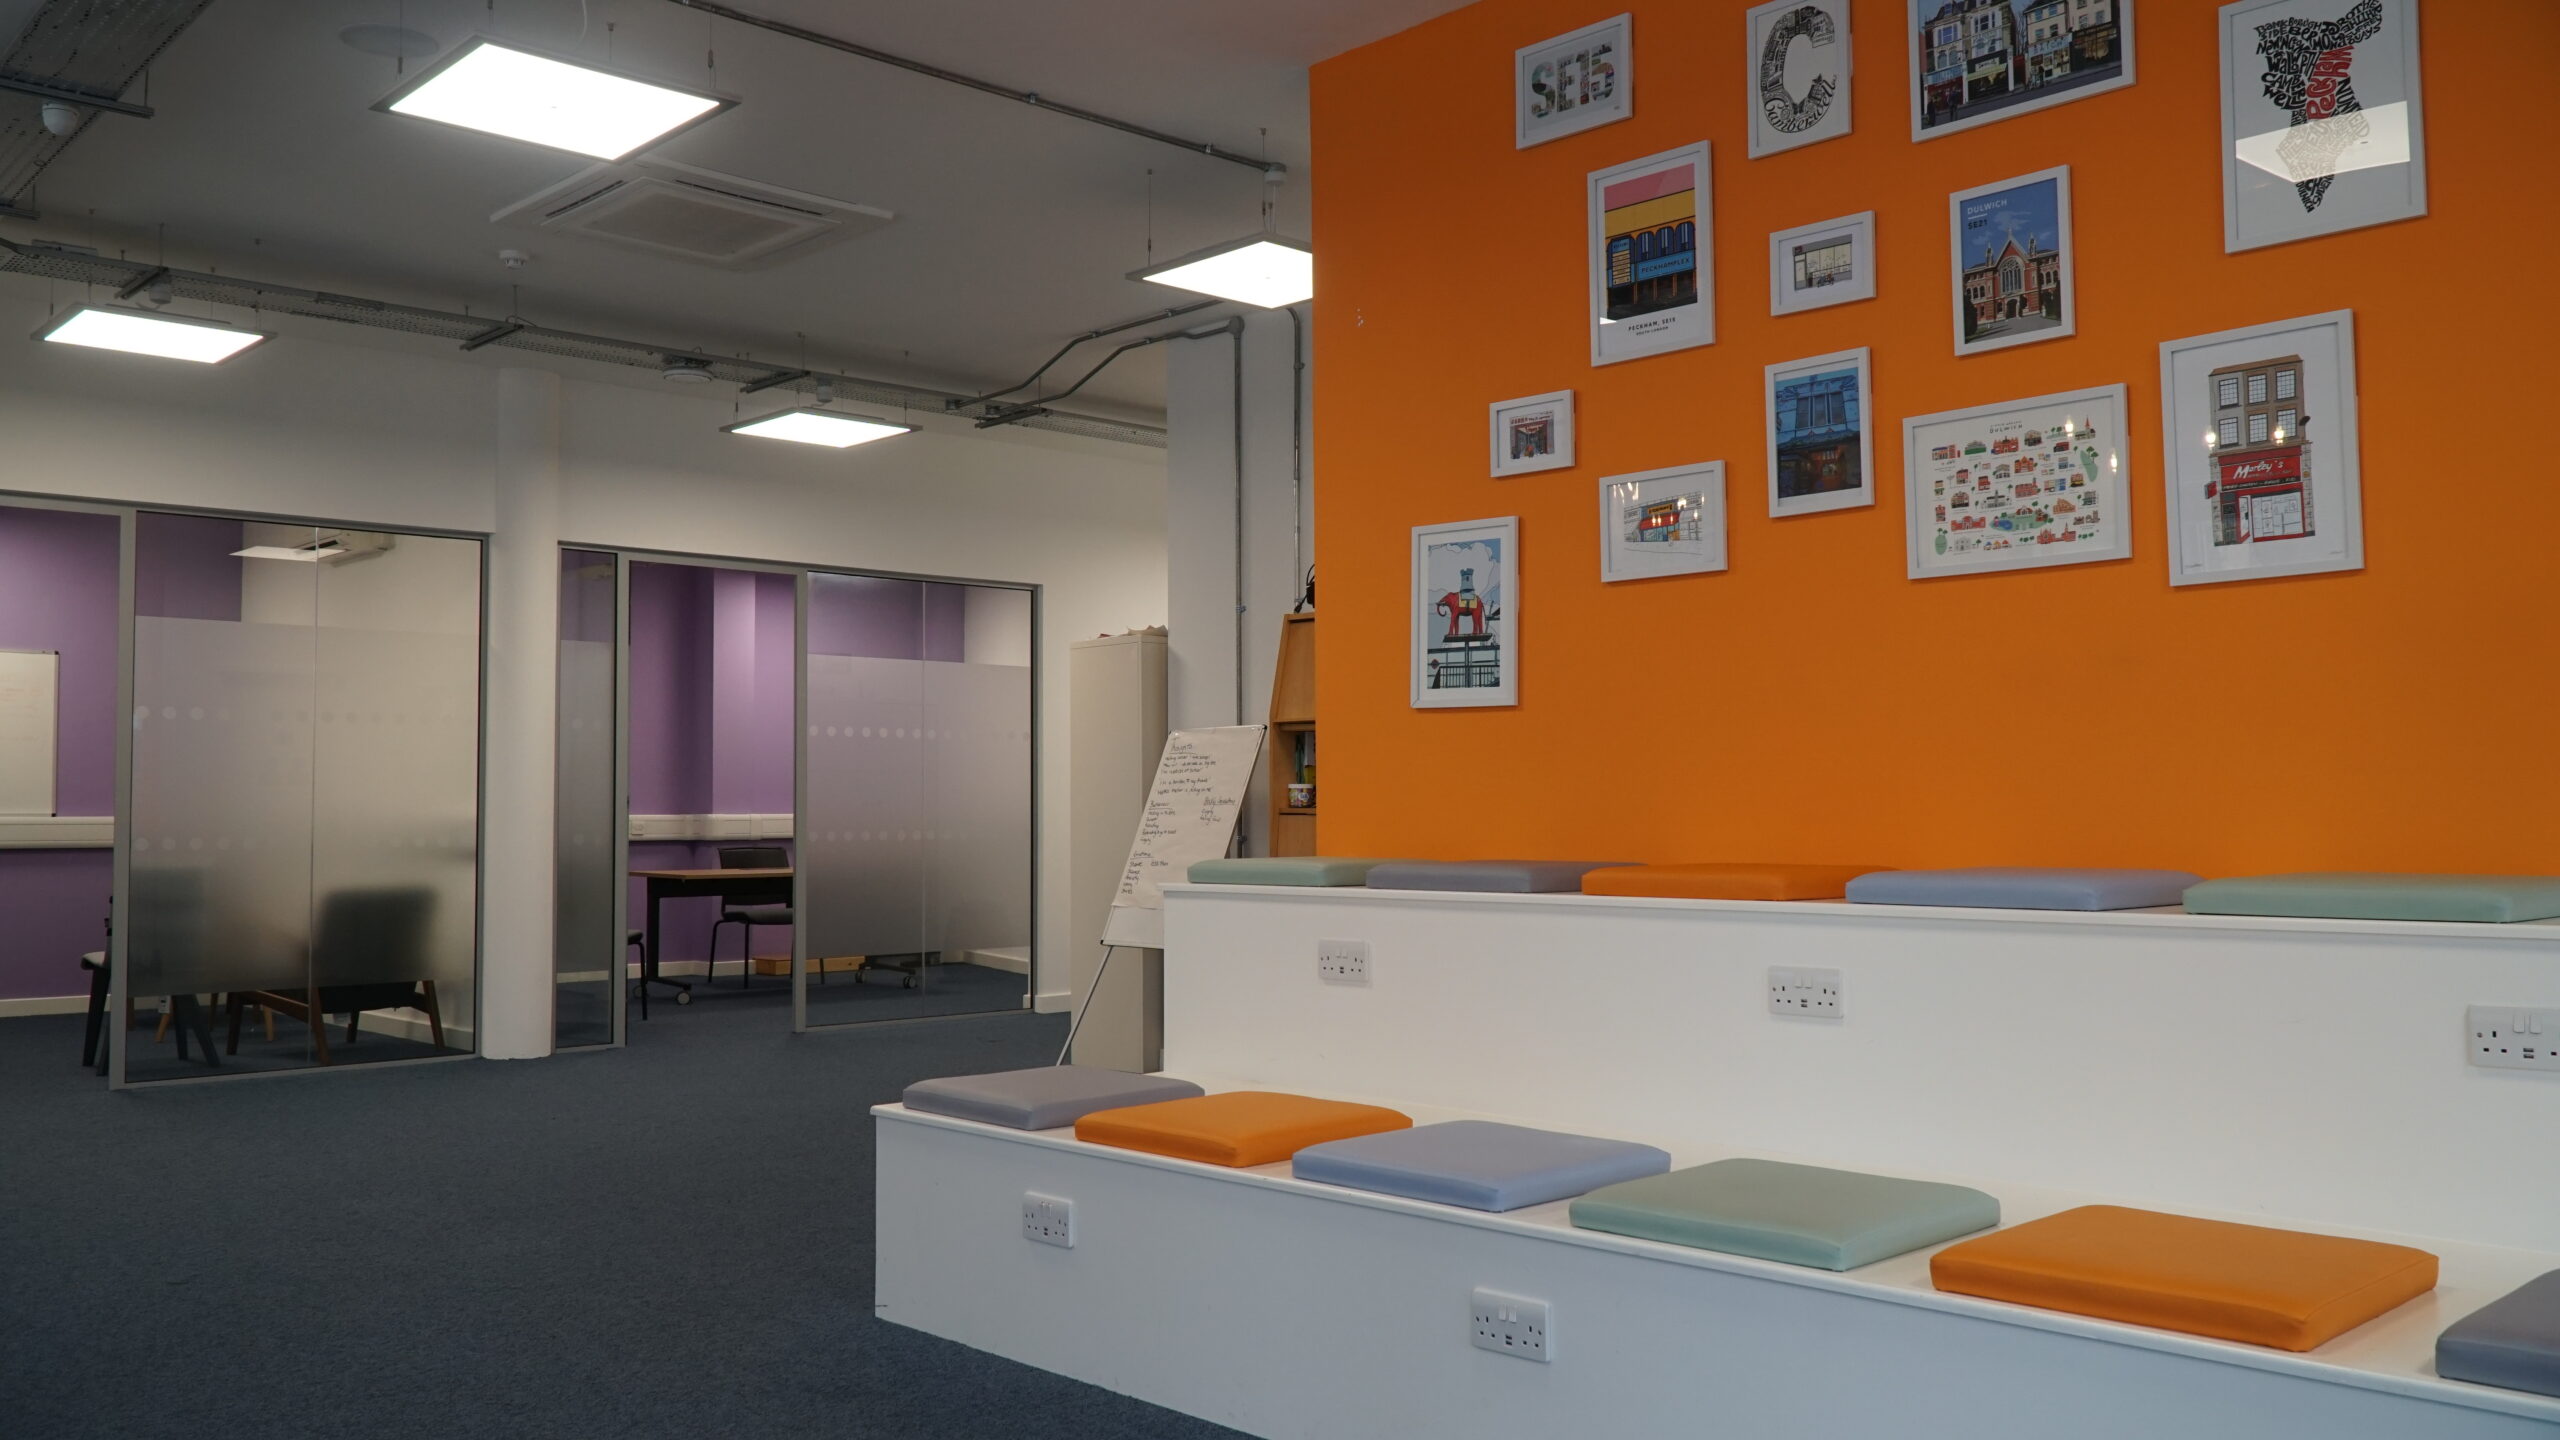 A spacious room with orange walls and artwork, leading up to two therapy rooms with purple walls. The rooms have a warm and inviting atmosphere.